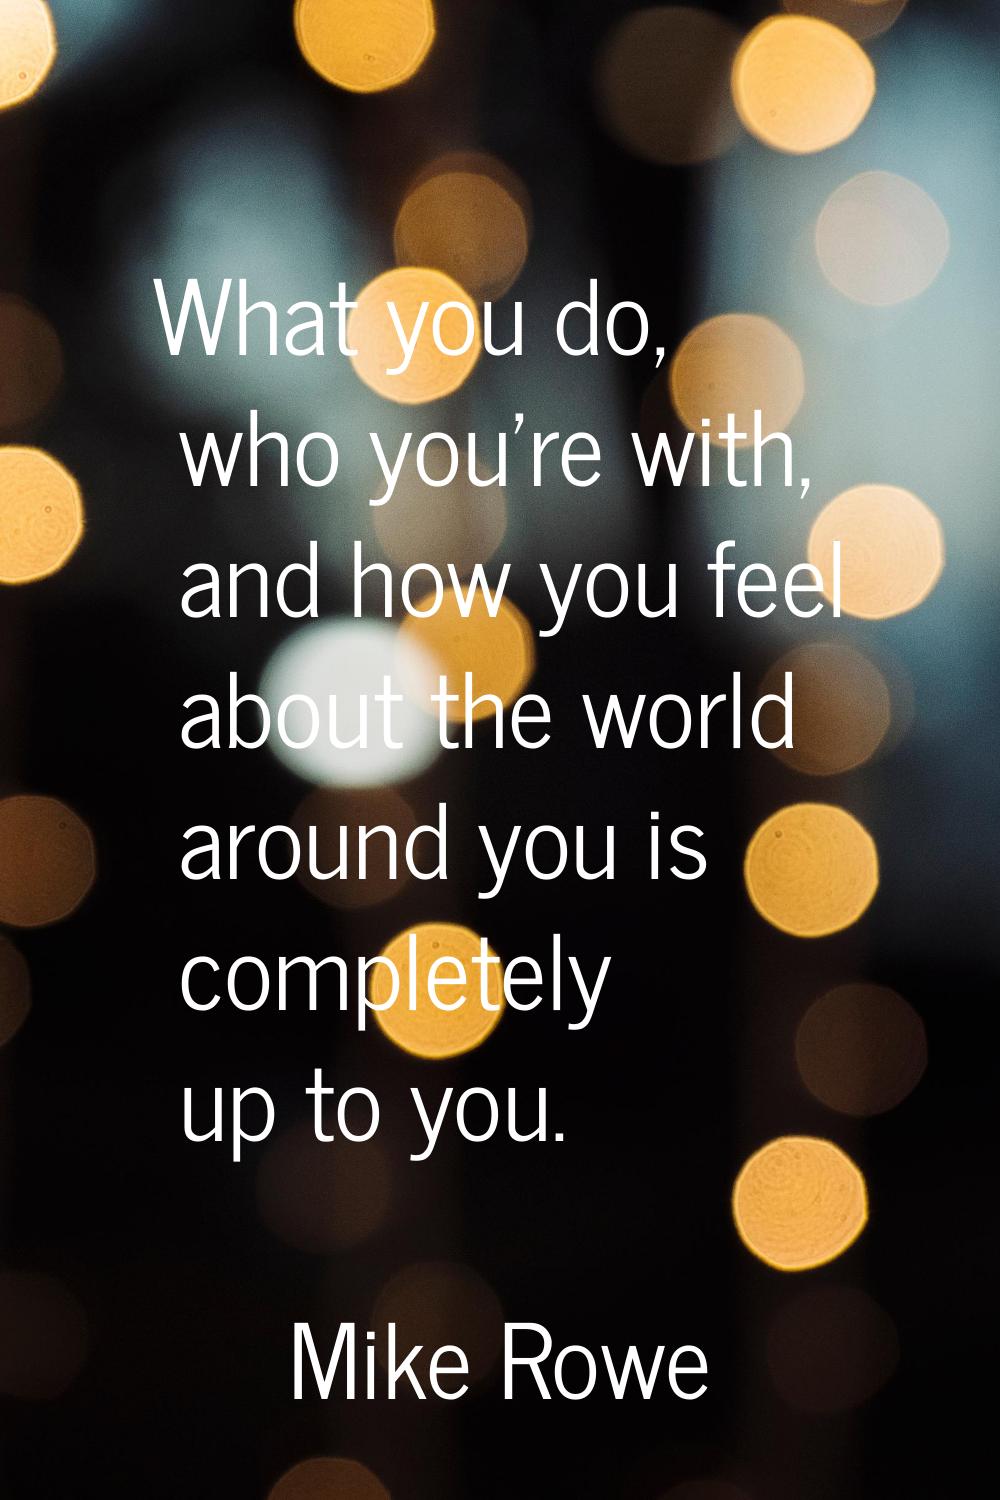 What you do, who you're with, and how you feel about the world around you is completely up to you.